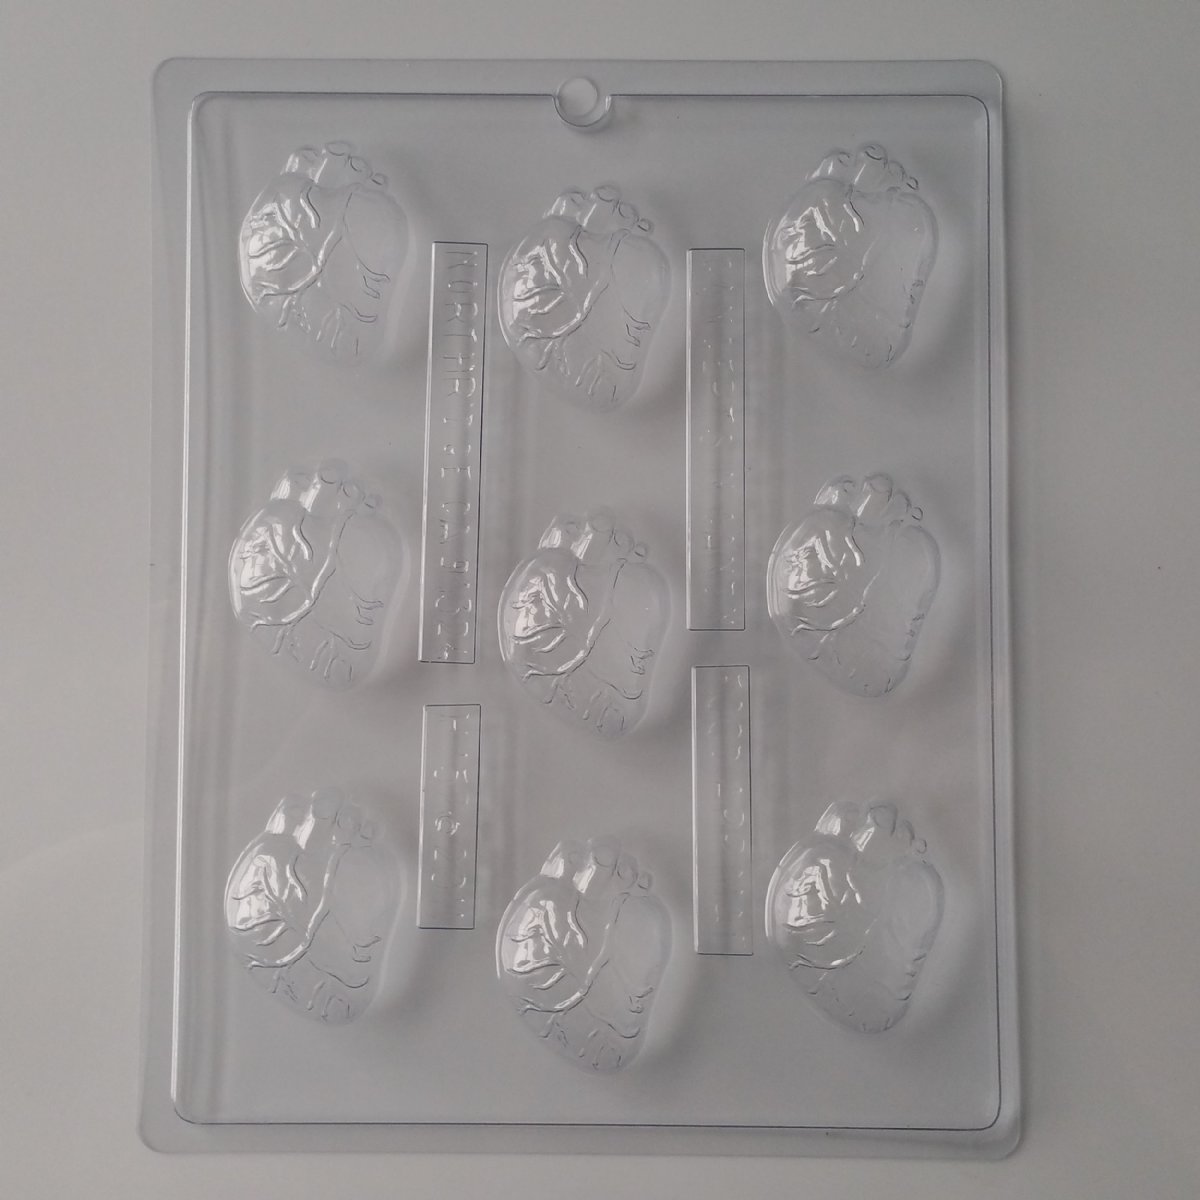 Bite Size Human Heart Candy Molds H157